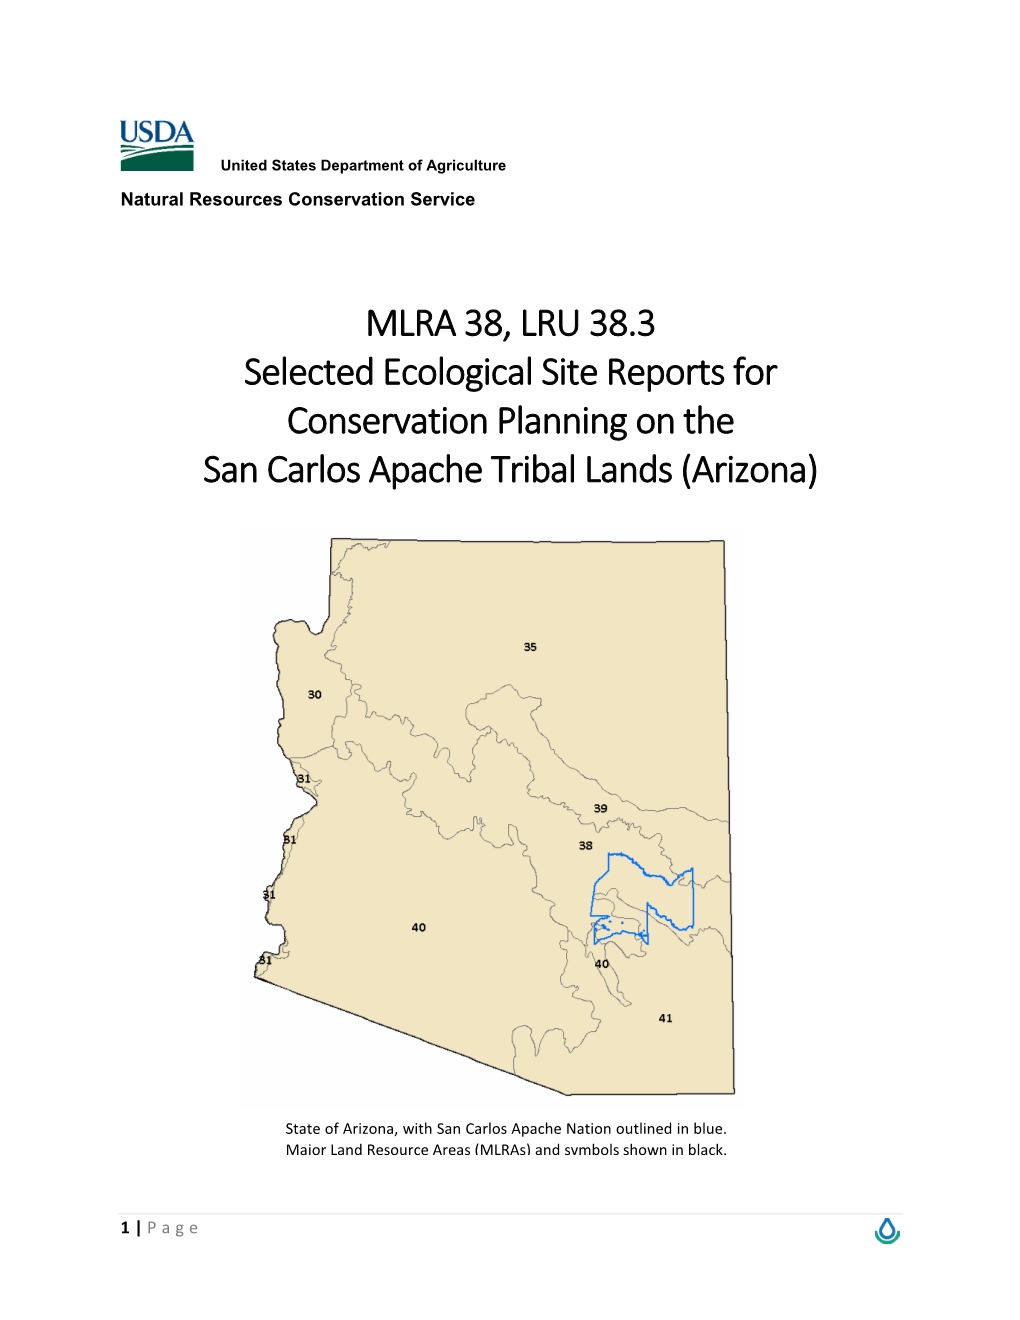 MLRA 38, LRU 38.3 Selected Ecological Site Reports for Conservation Planning on the San Carlos Apache Tribal Lands (Arizona)